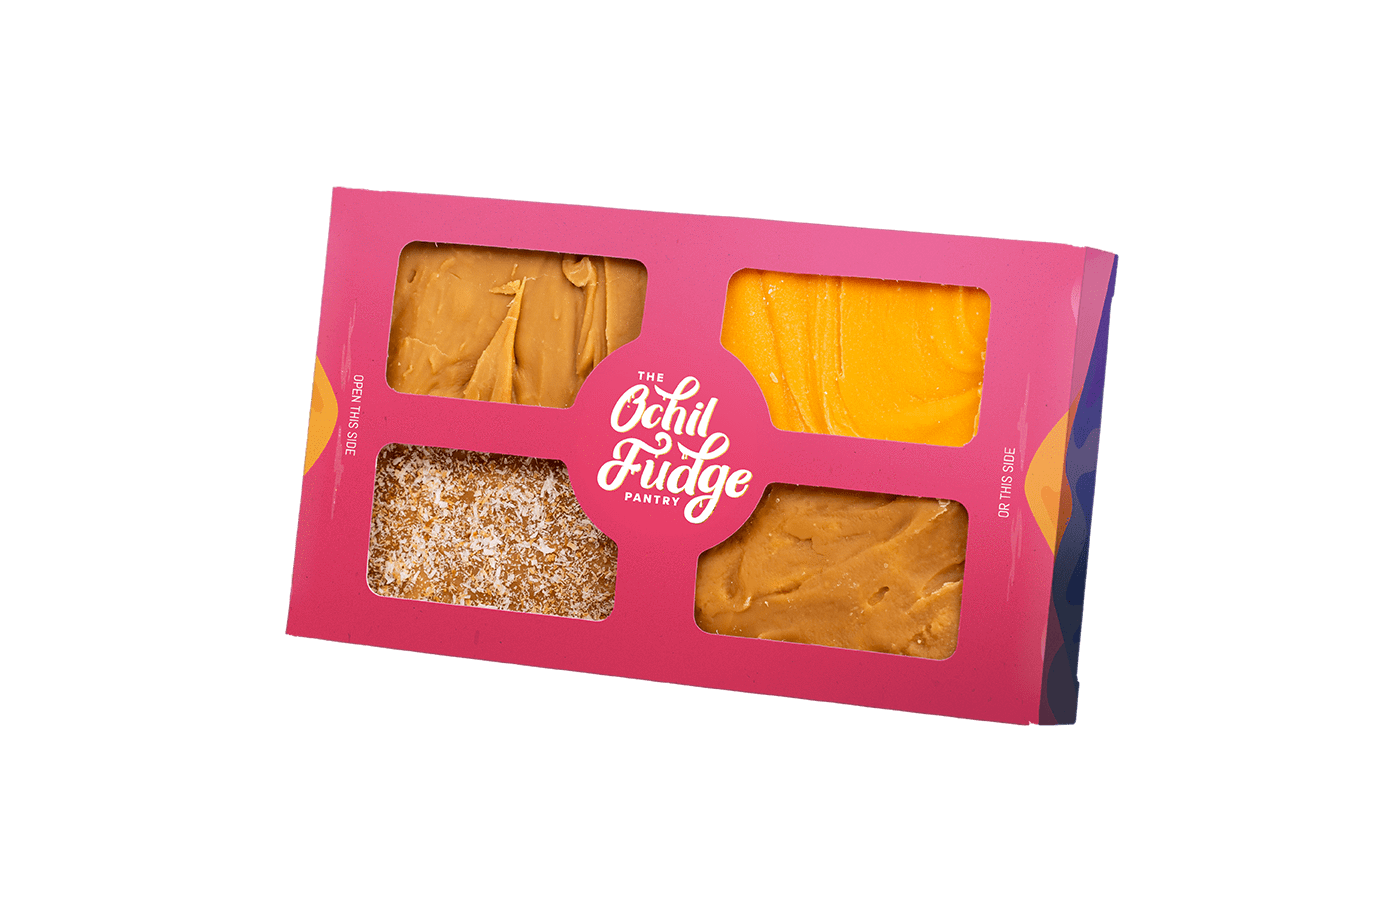 Images The Ochil Fudge Pantry